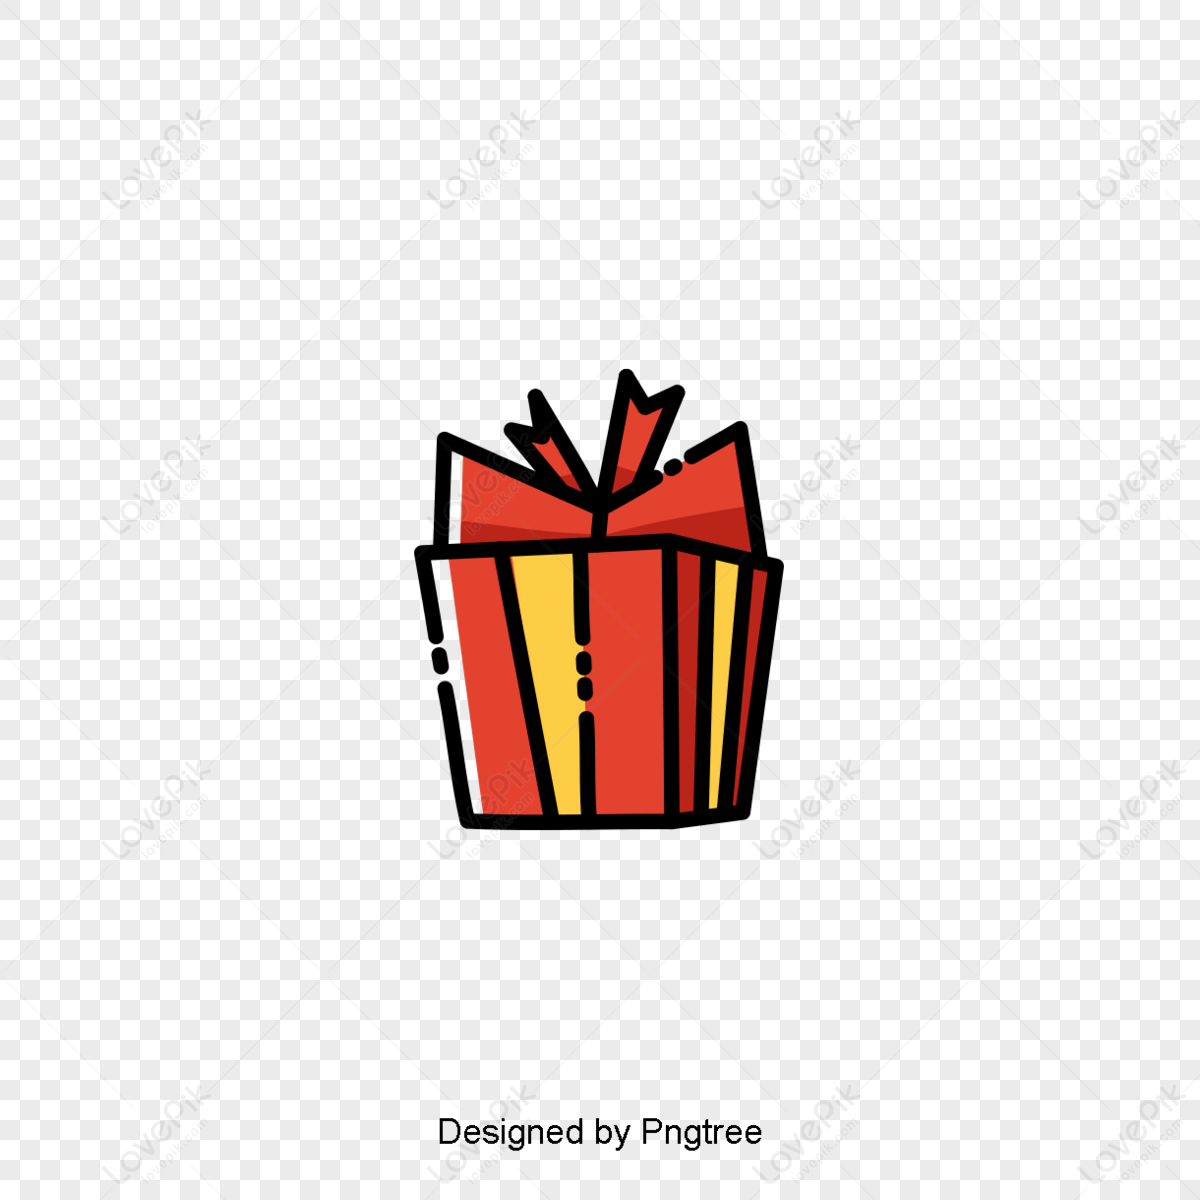 Gif Icon PNG Images, Vectors Free Download - Pngtree